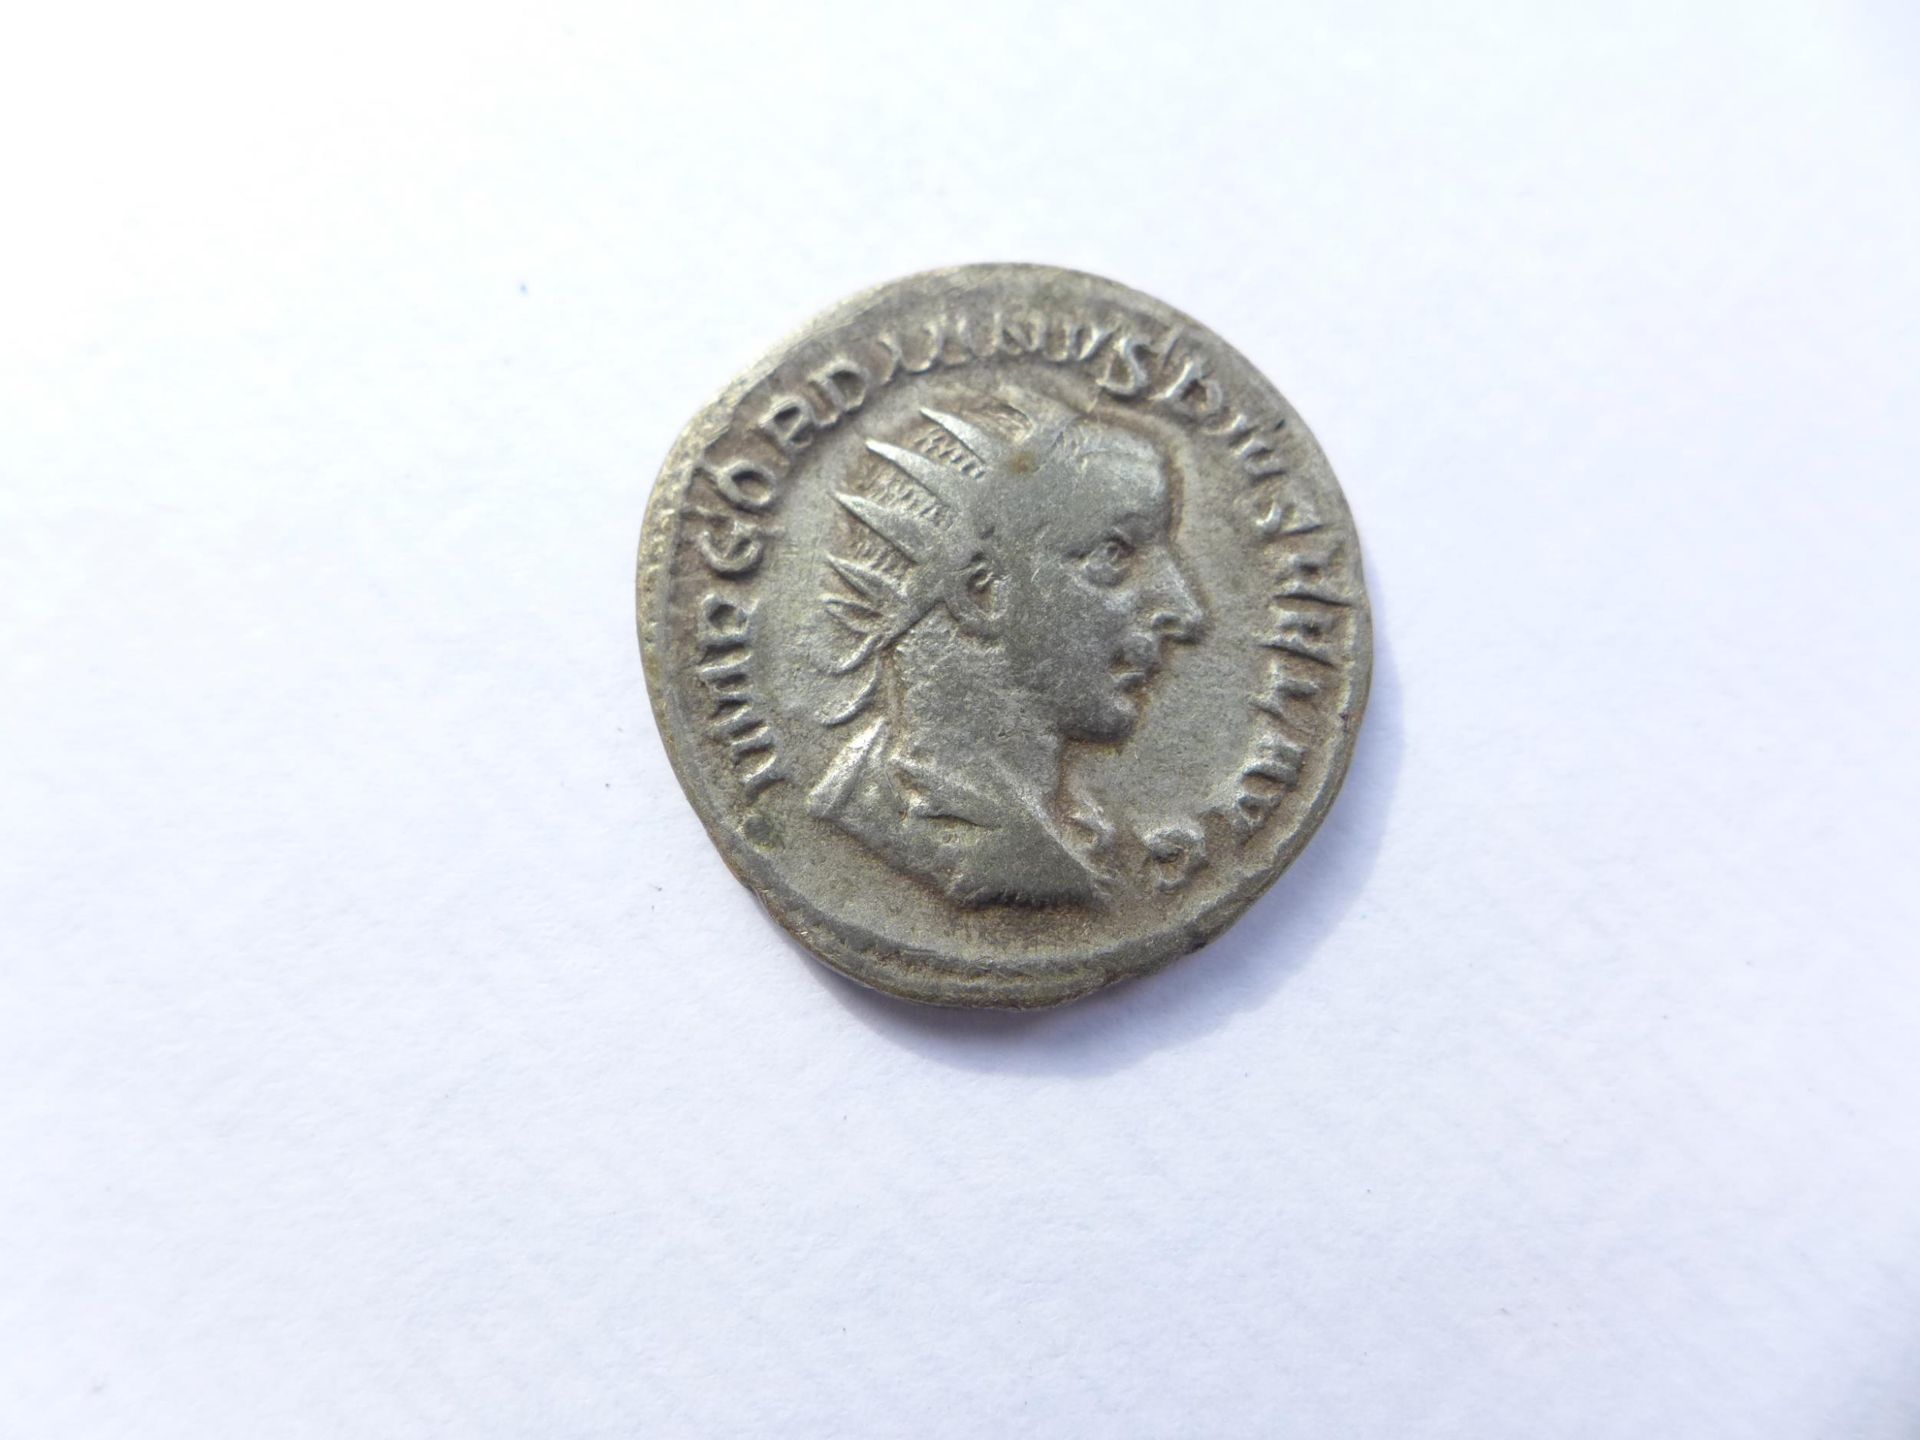 A GORDIAN III (238-244 AD) SILVER ANTONIANUS AND A SMALL METAL BEAD - Image 2 of 3